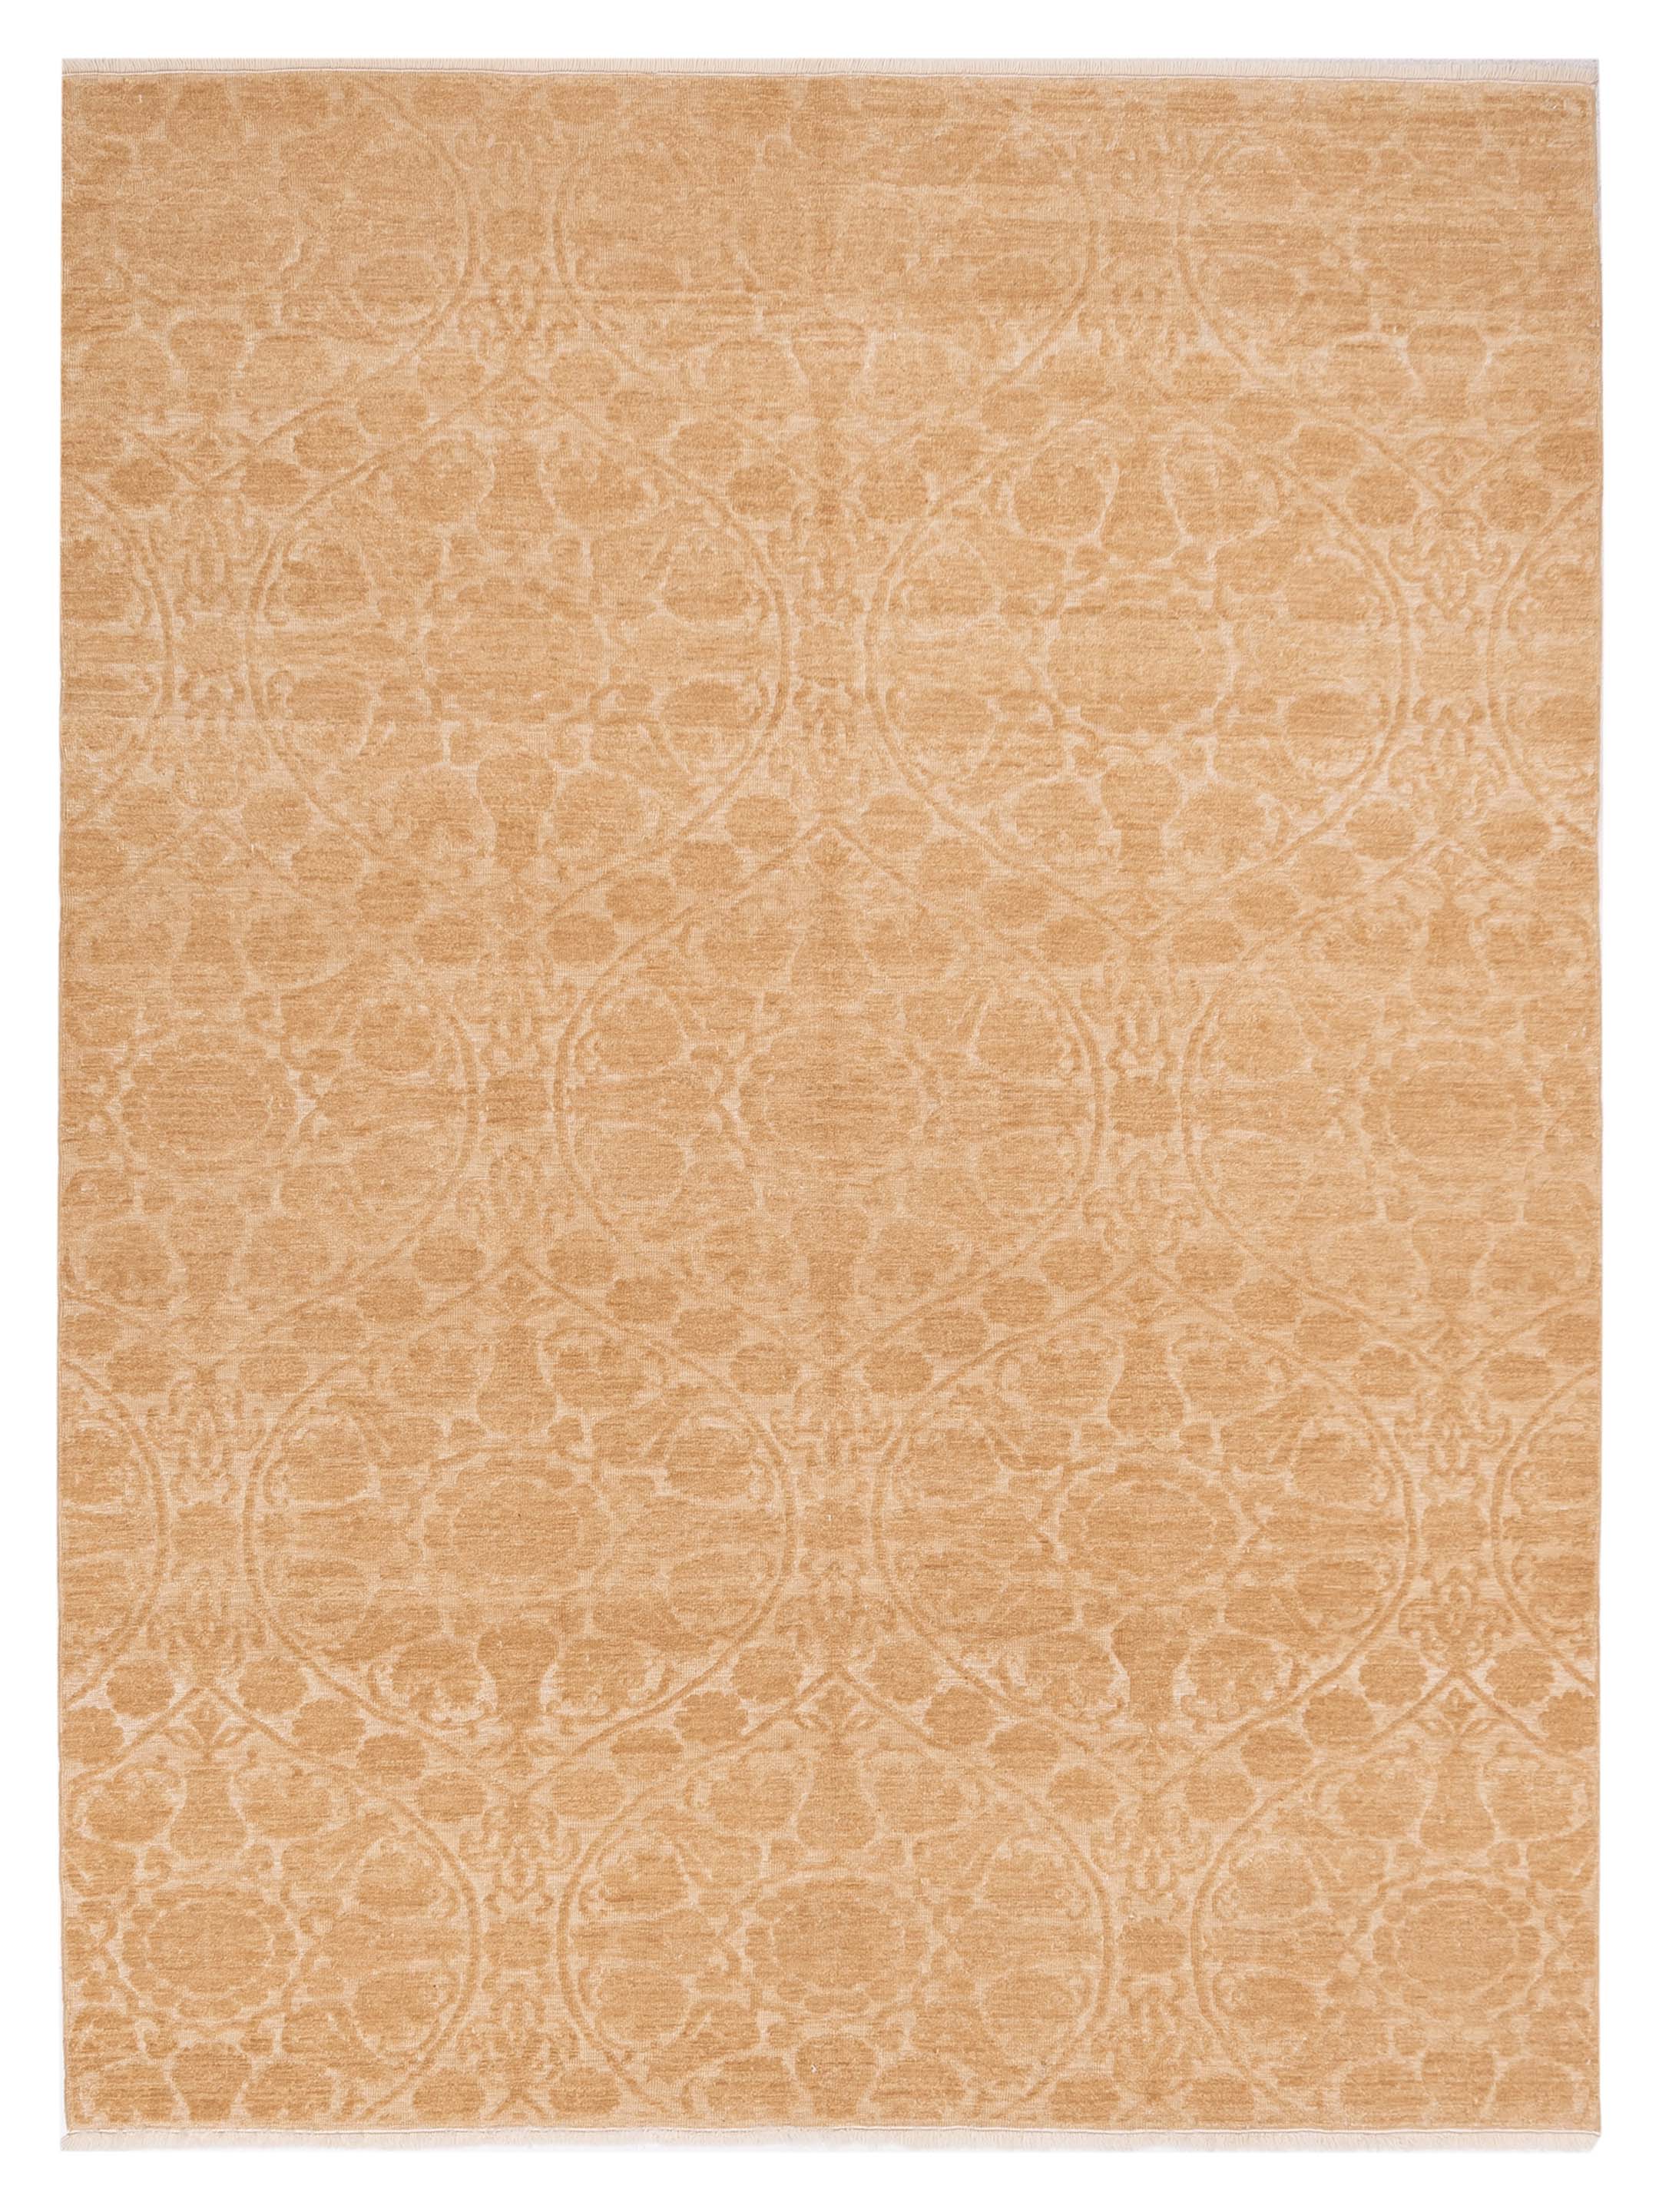 Transitional Gold Area Rug	